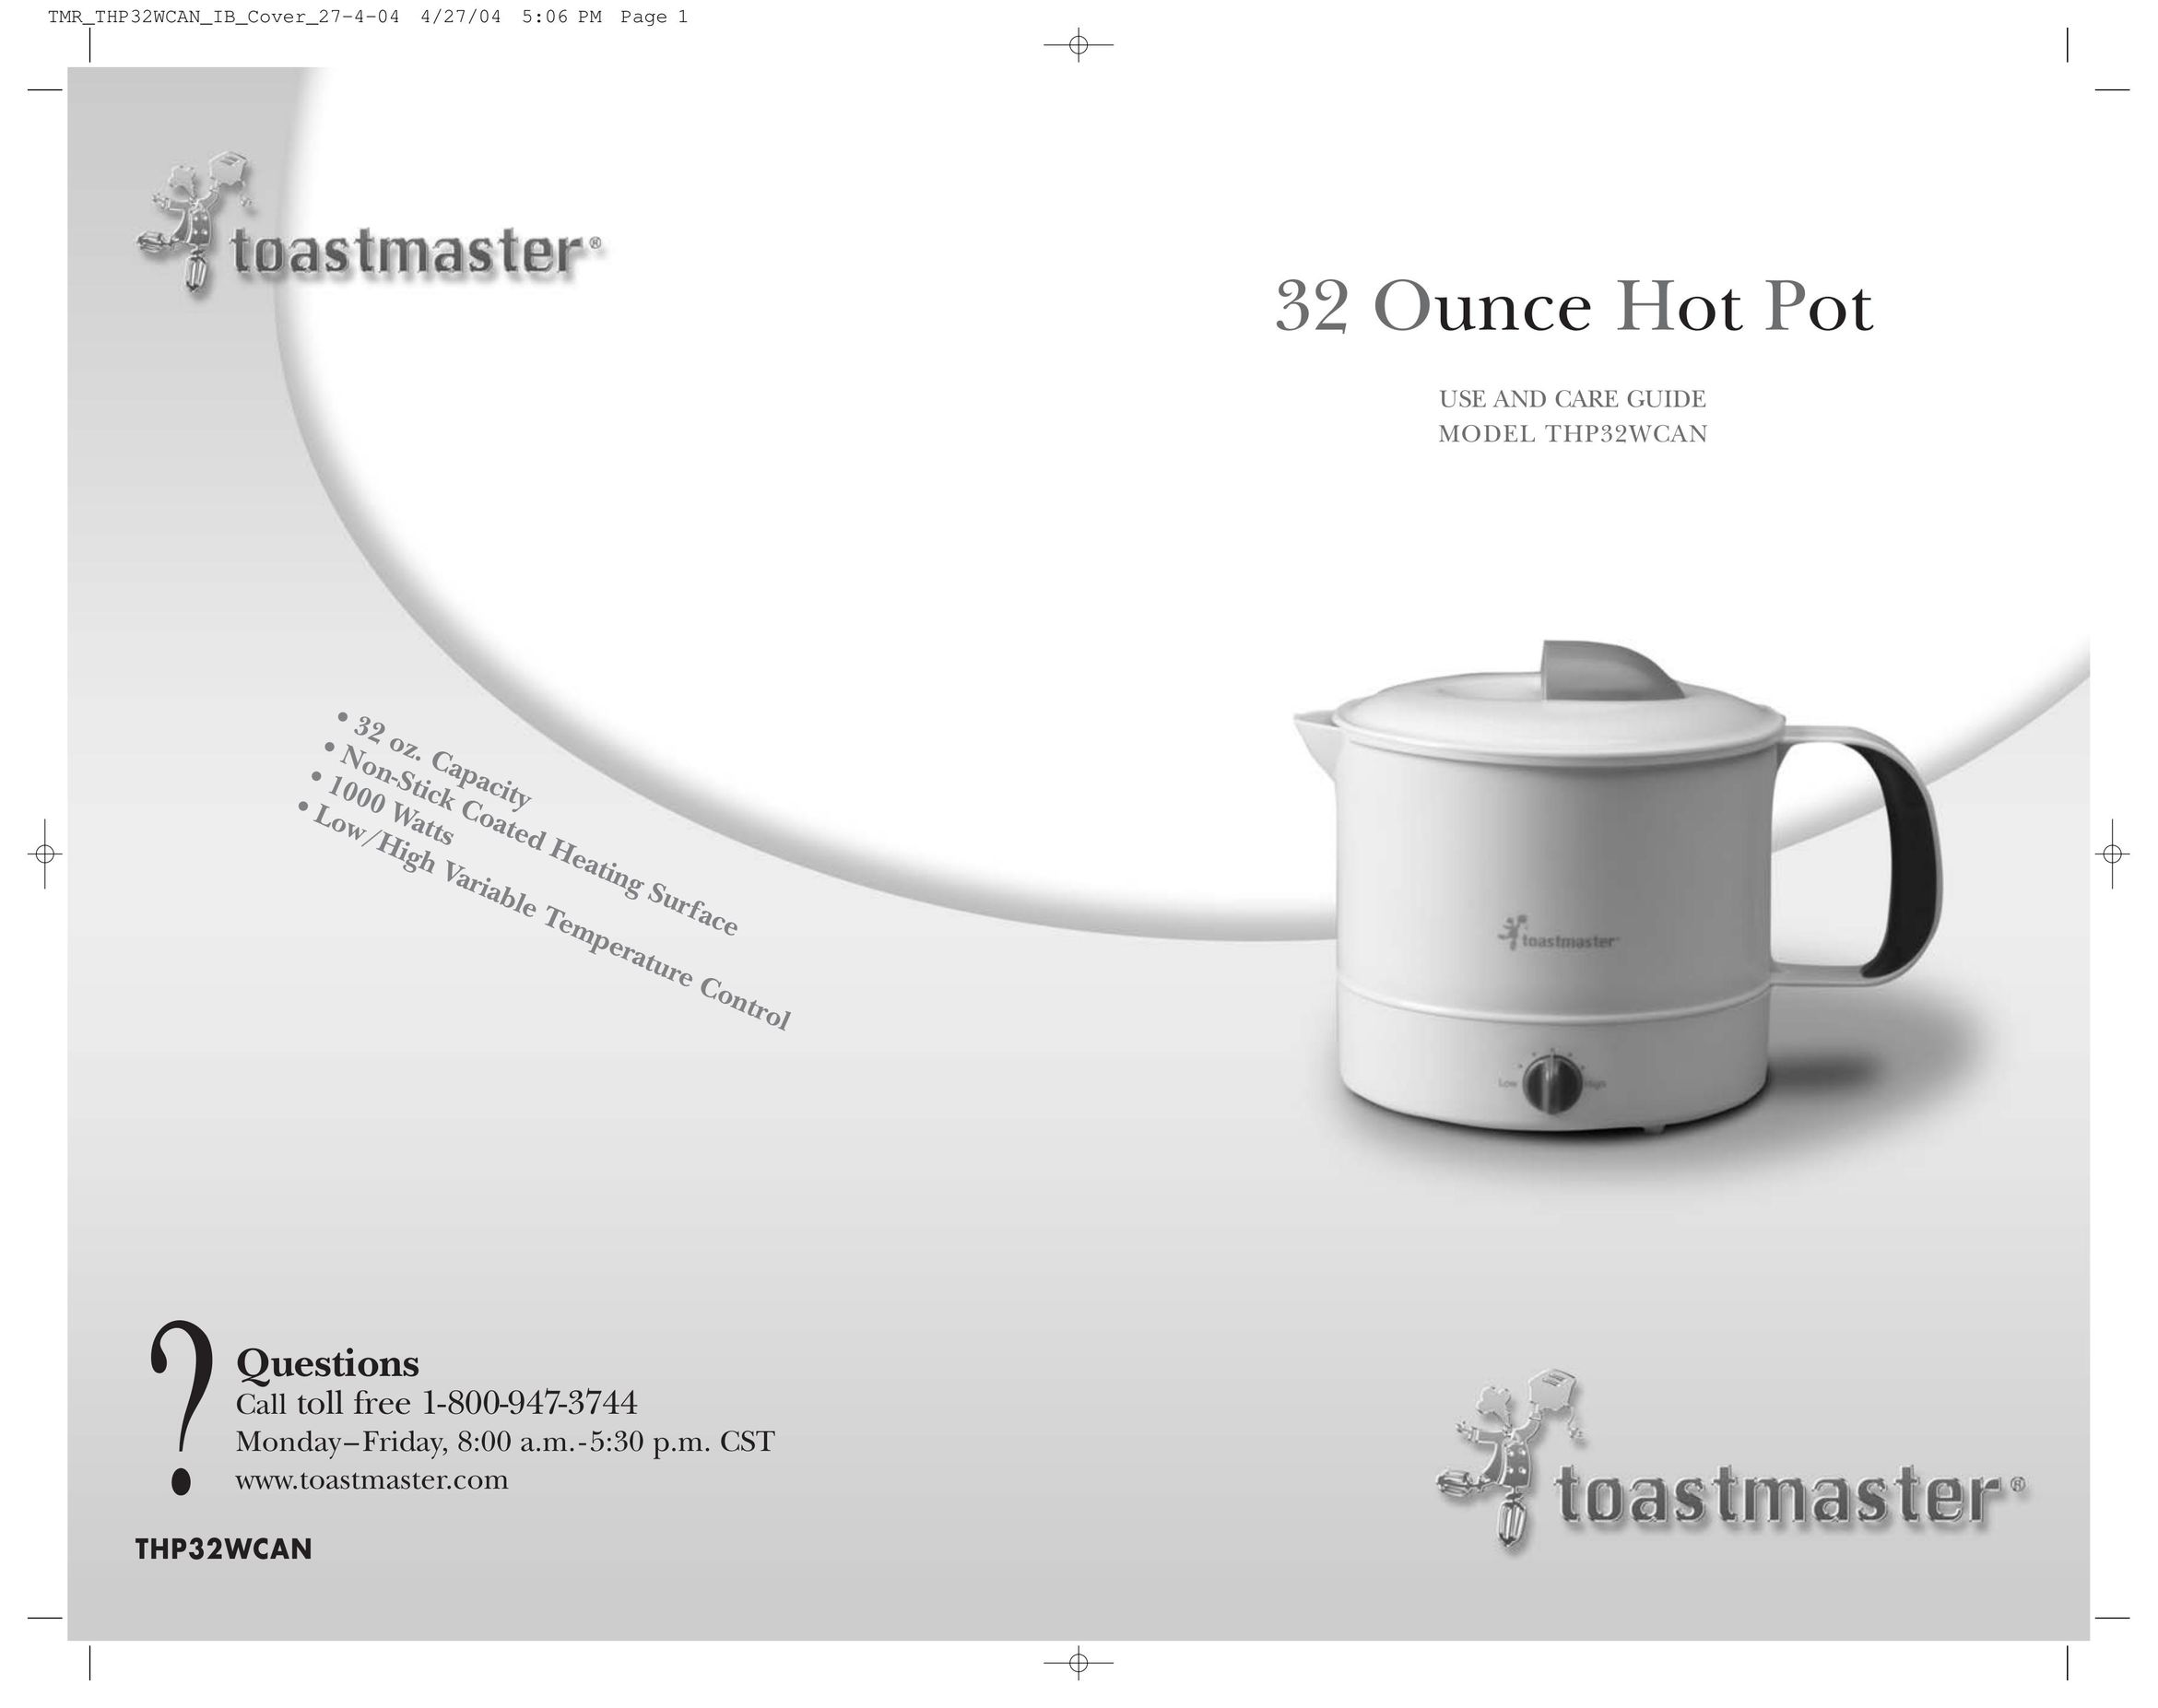 Toastmaster THP32WCAN Hot Beverage Maker User Manual